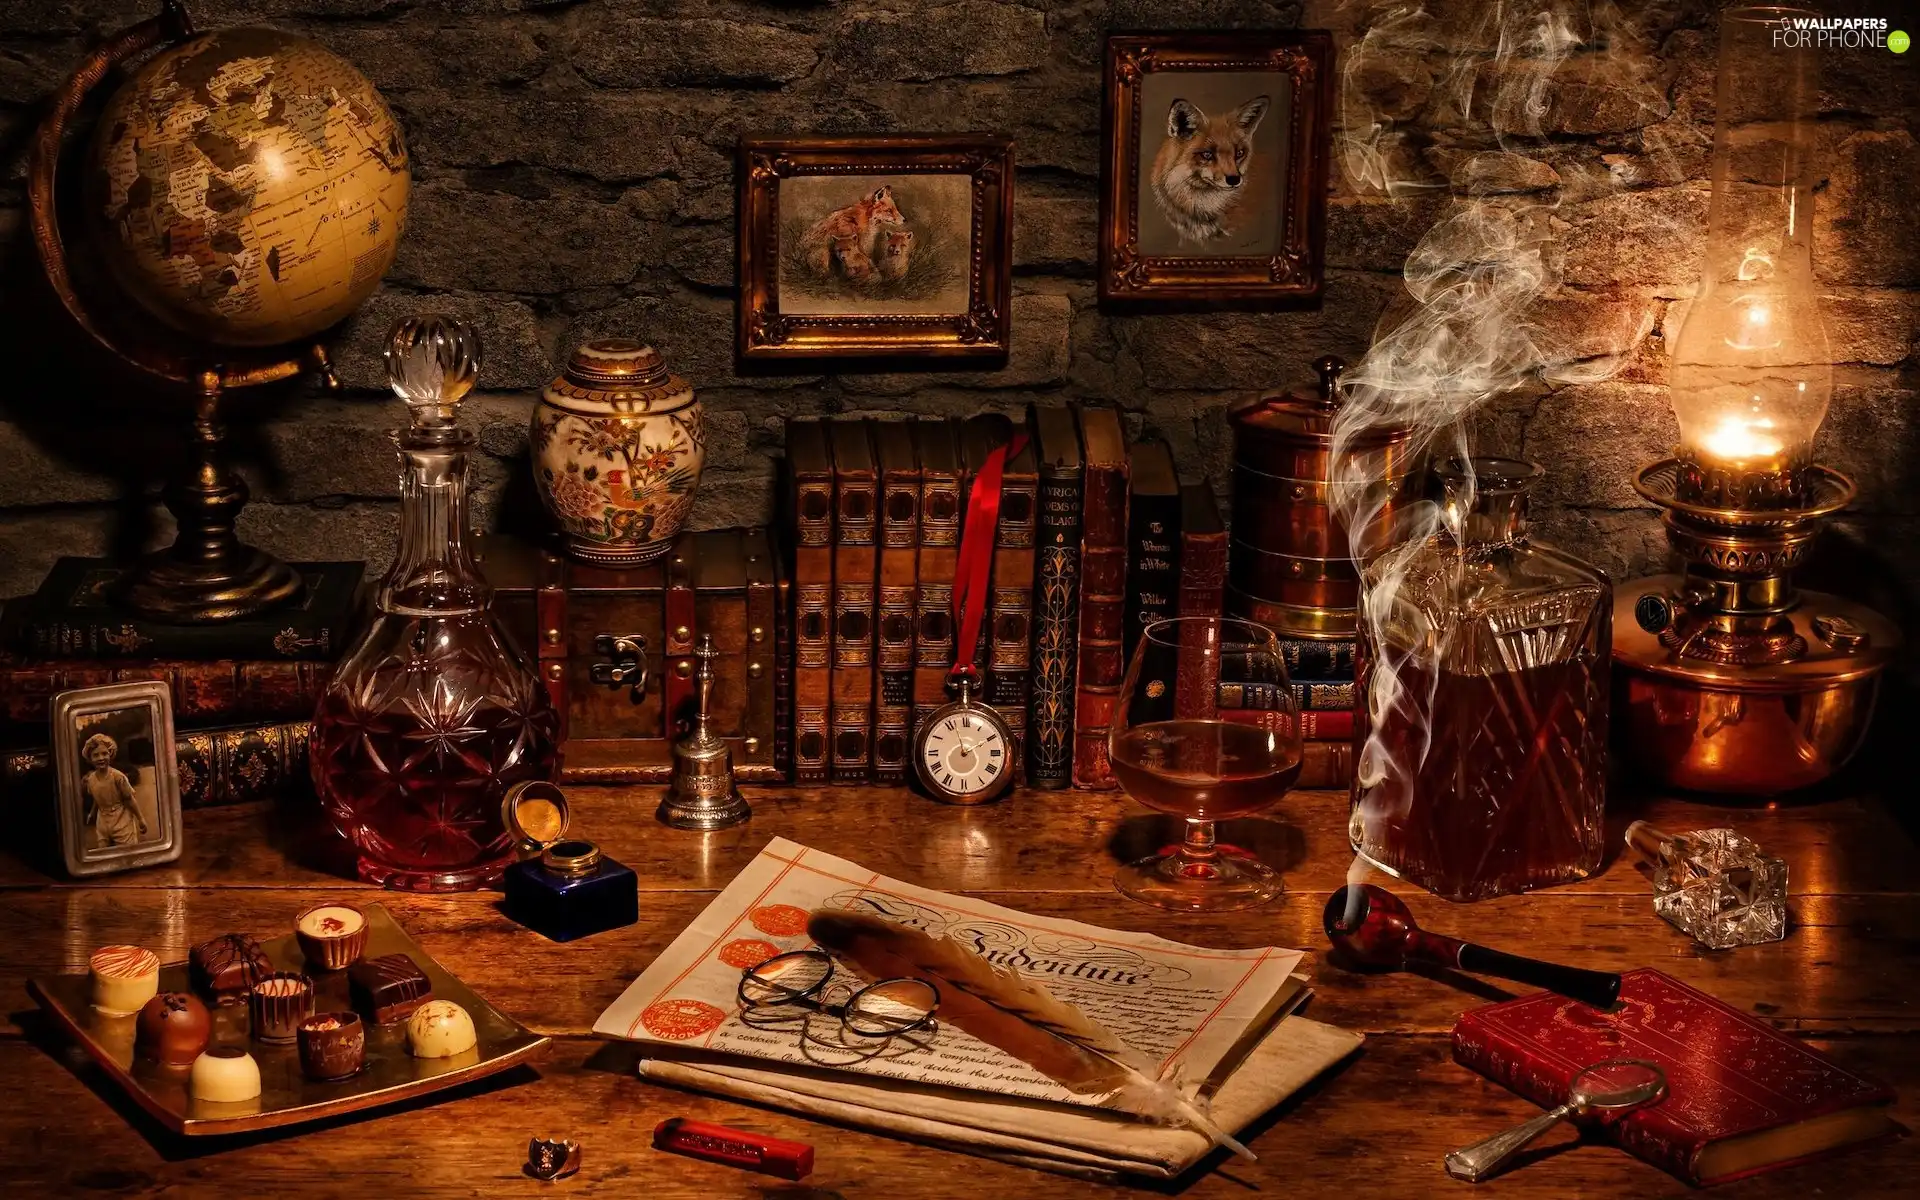 Books, composition, smoke, pipe, Paper, pralines, decanters, pictures, globe, glass, Lamp